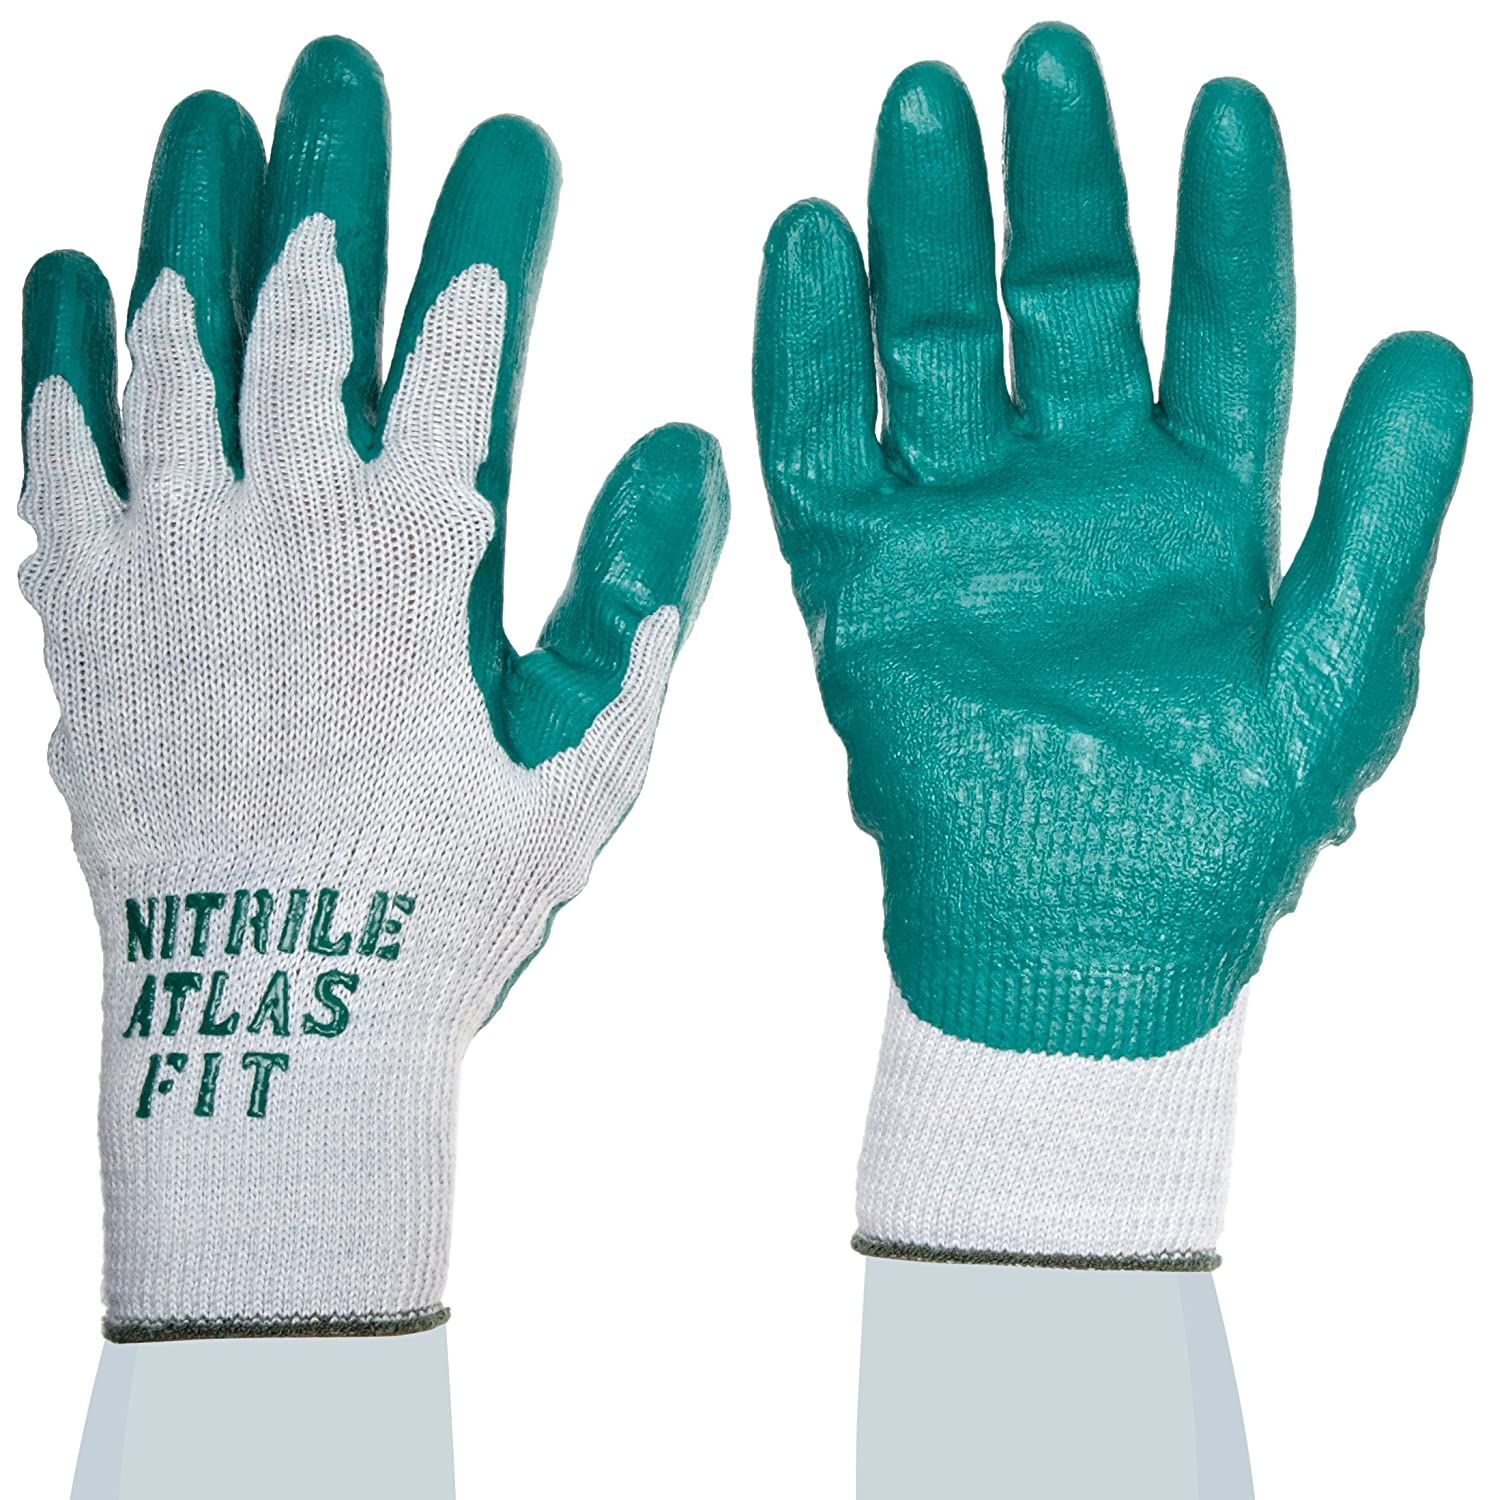 Nitrile palm coating,  Hi vis yellow/green coating, 10 gauge seamless cut resistant liner made with polyester/stainless steel, Hagane Coil™ Technology, large, ANSI CUT LEVEL A4